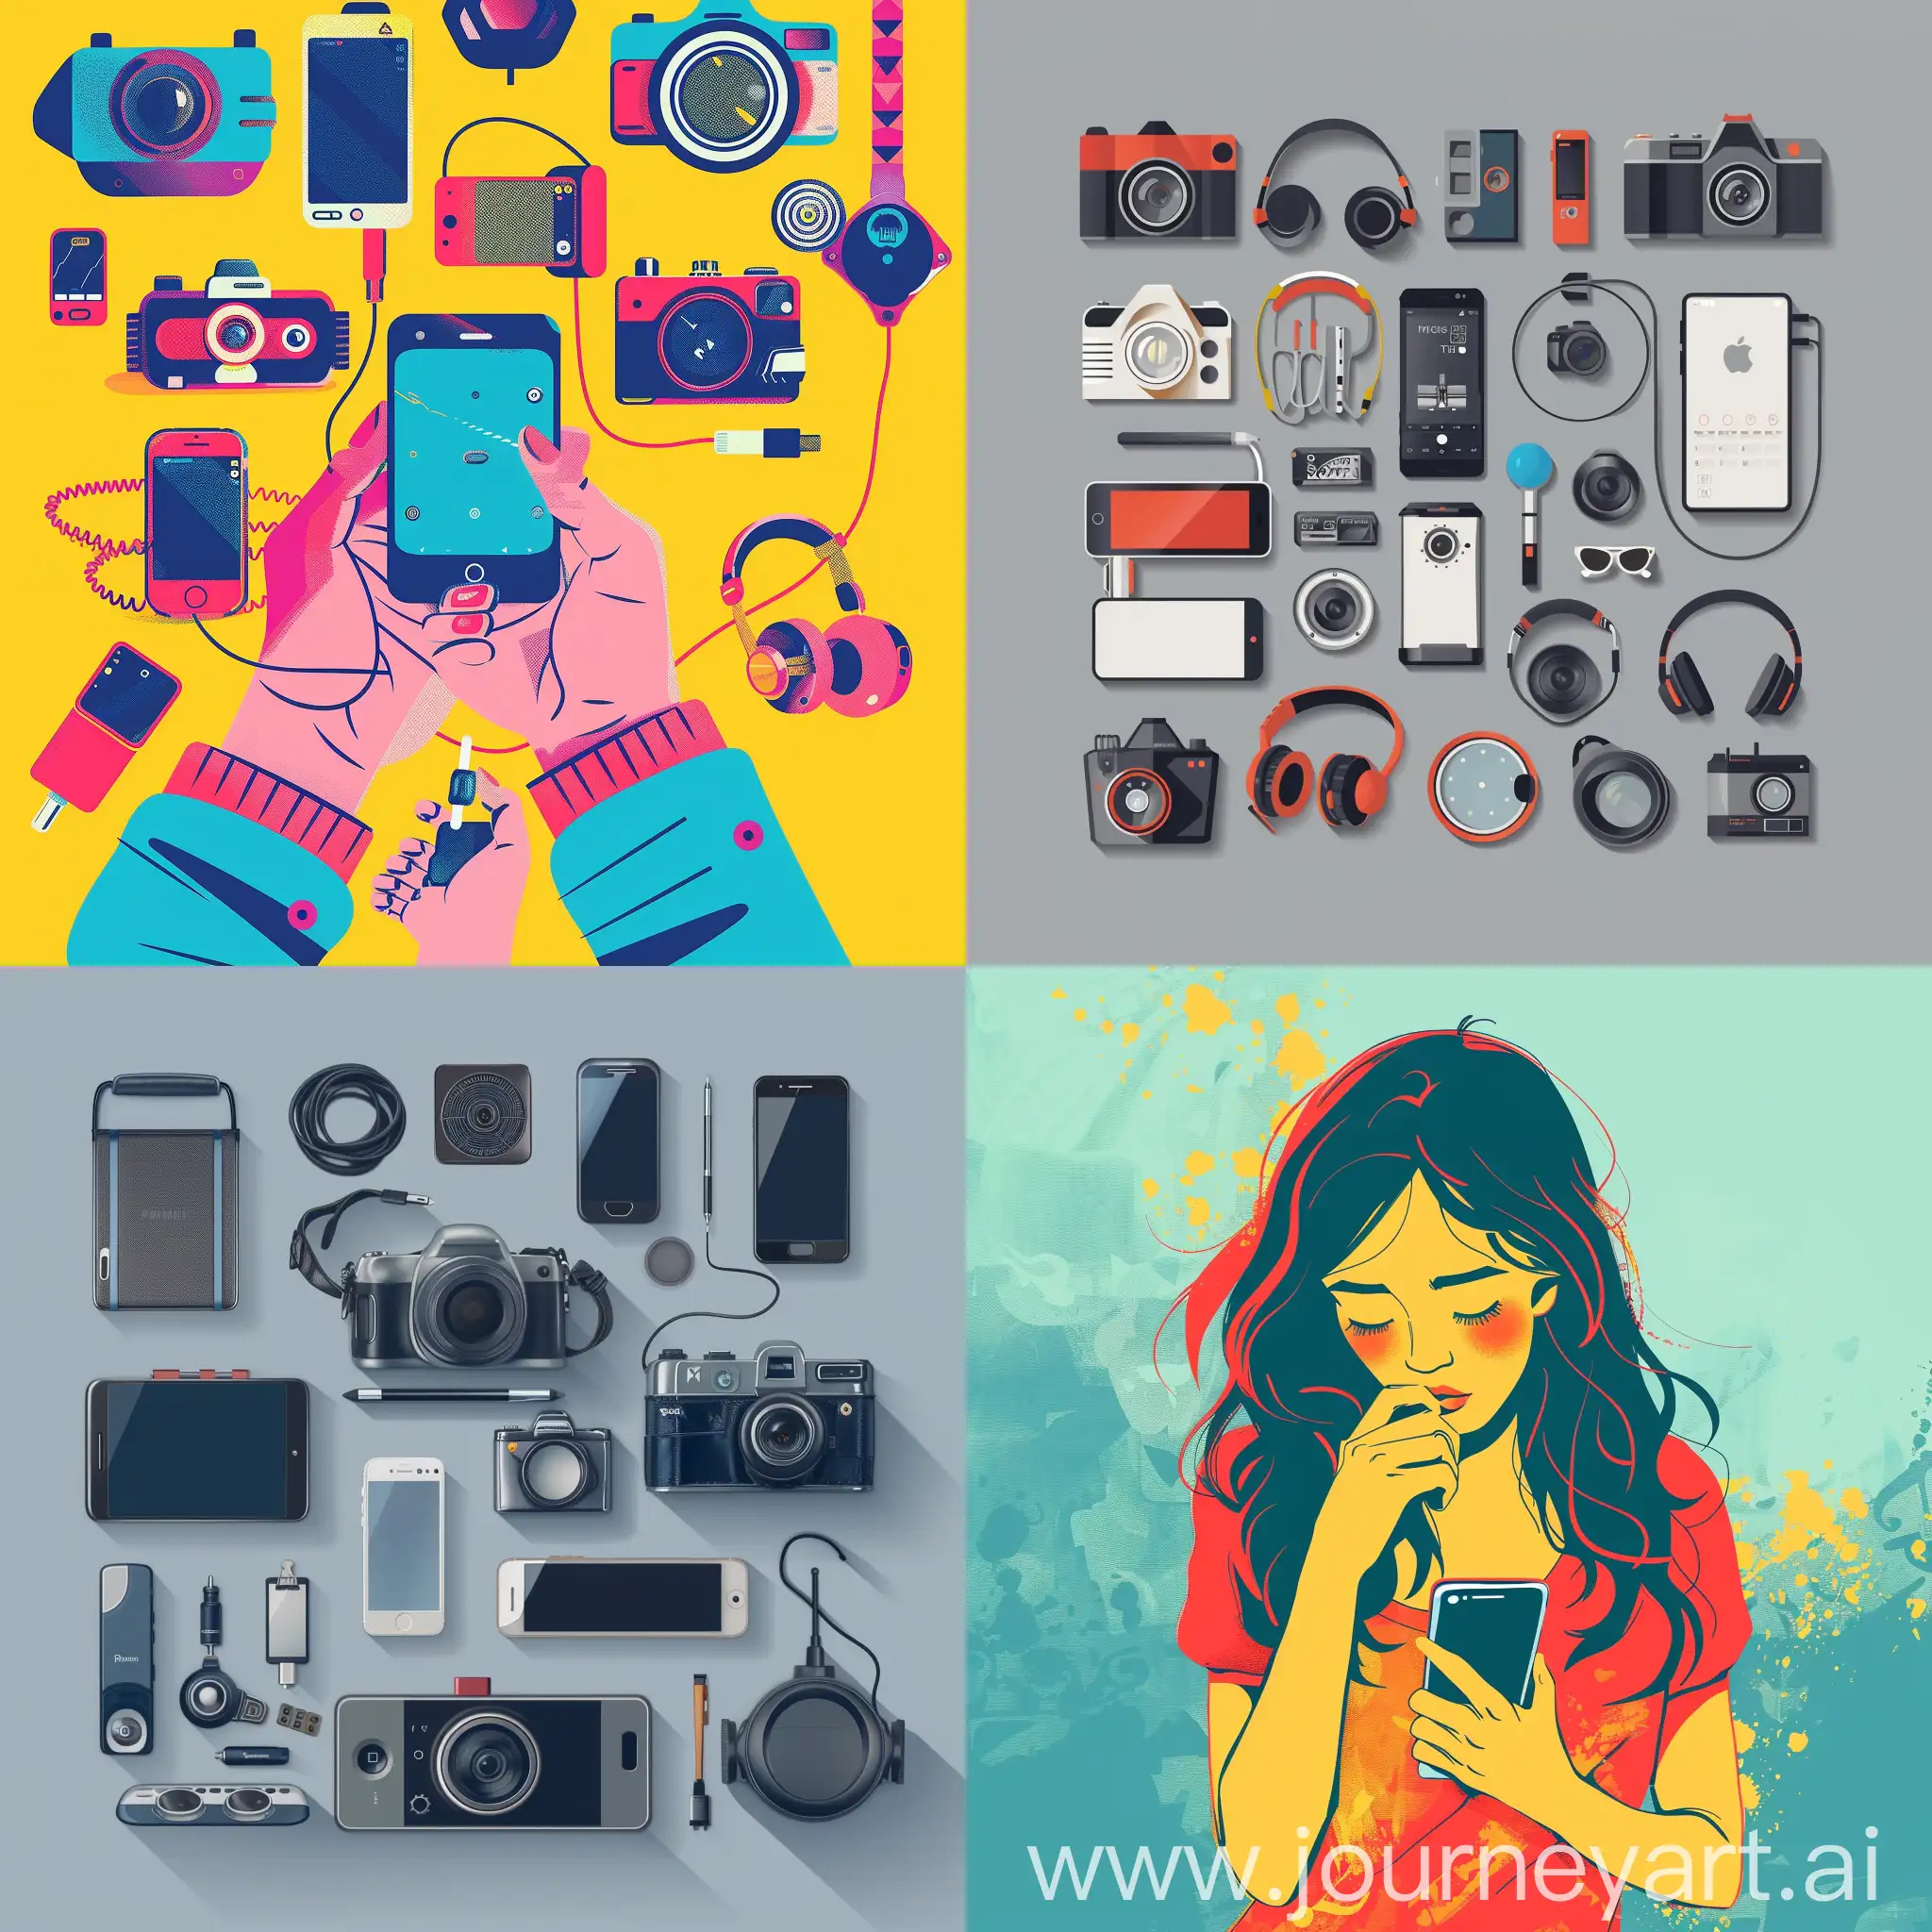 Create a poster “The most important gadget in my life is smaprtphone"